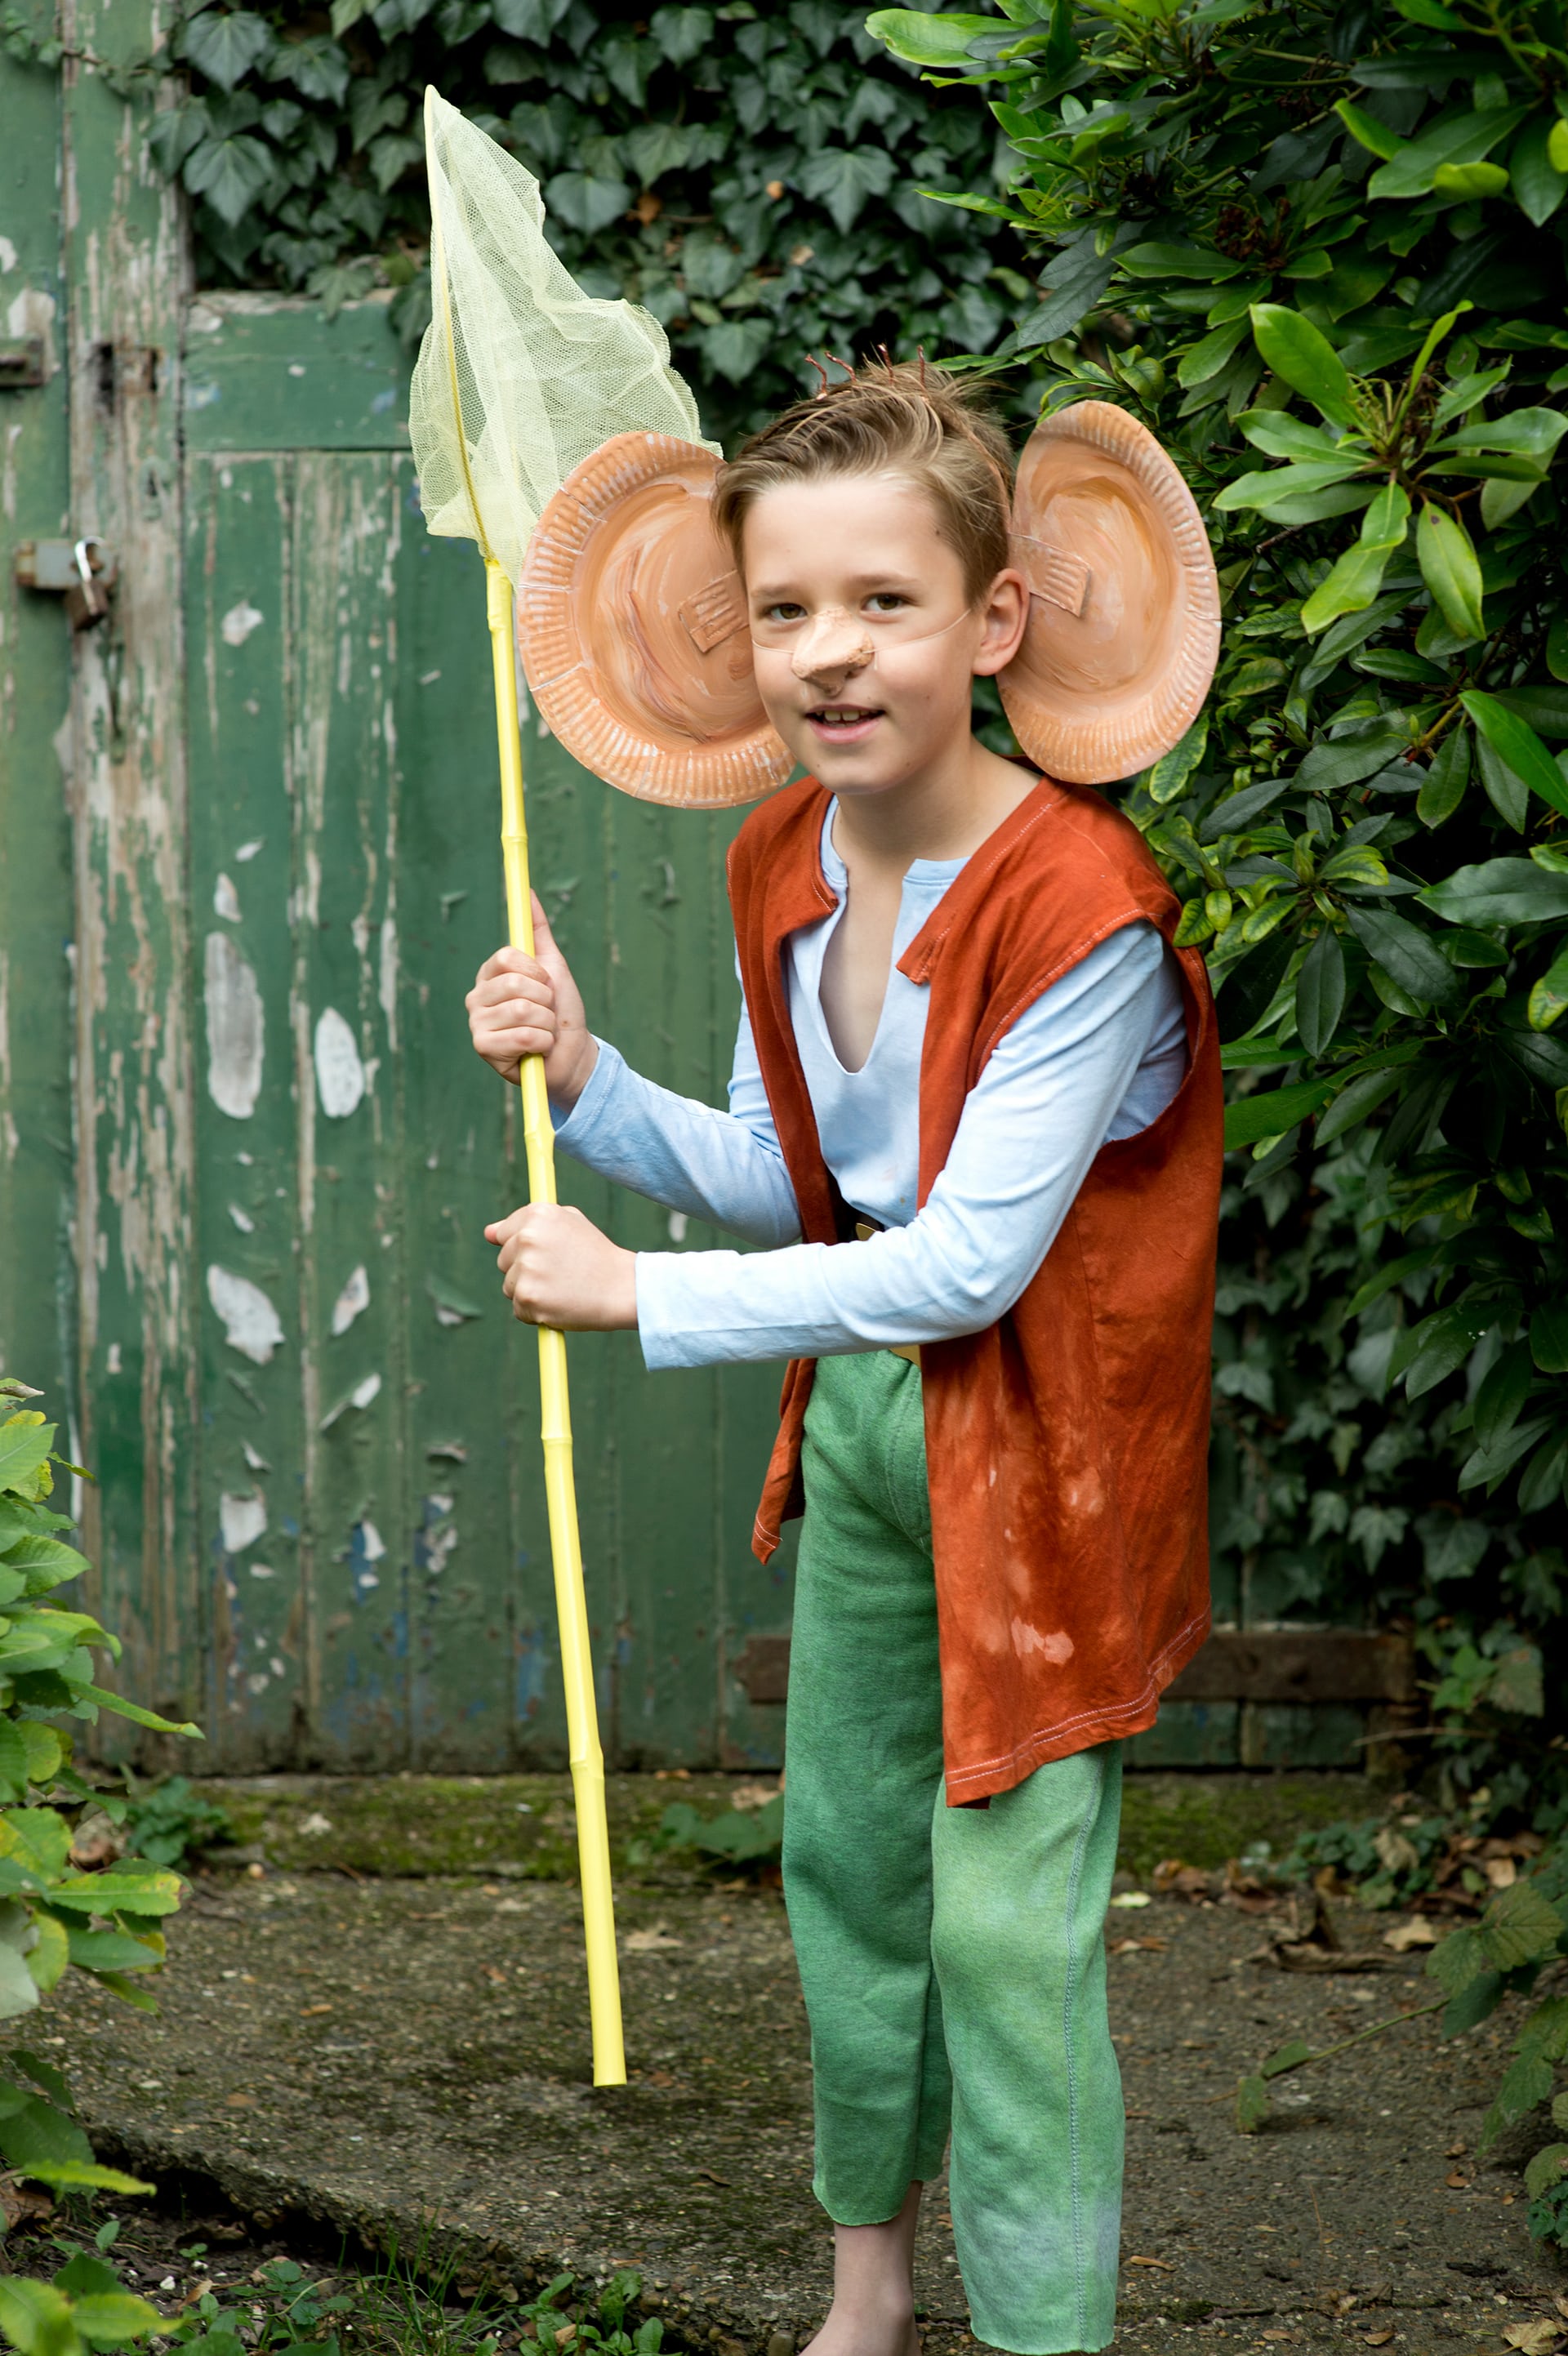 We have some inspiration to get you started in creating a costume for your kids this Book Week. 